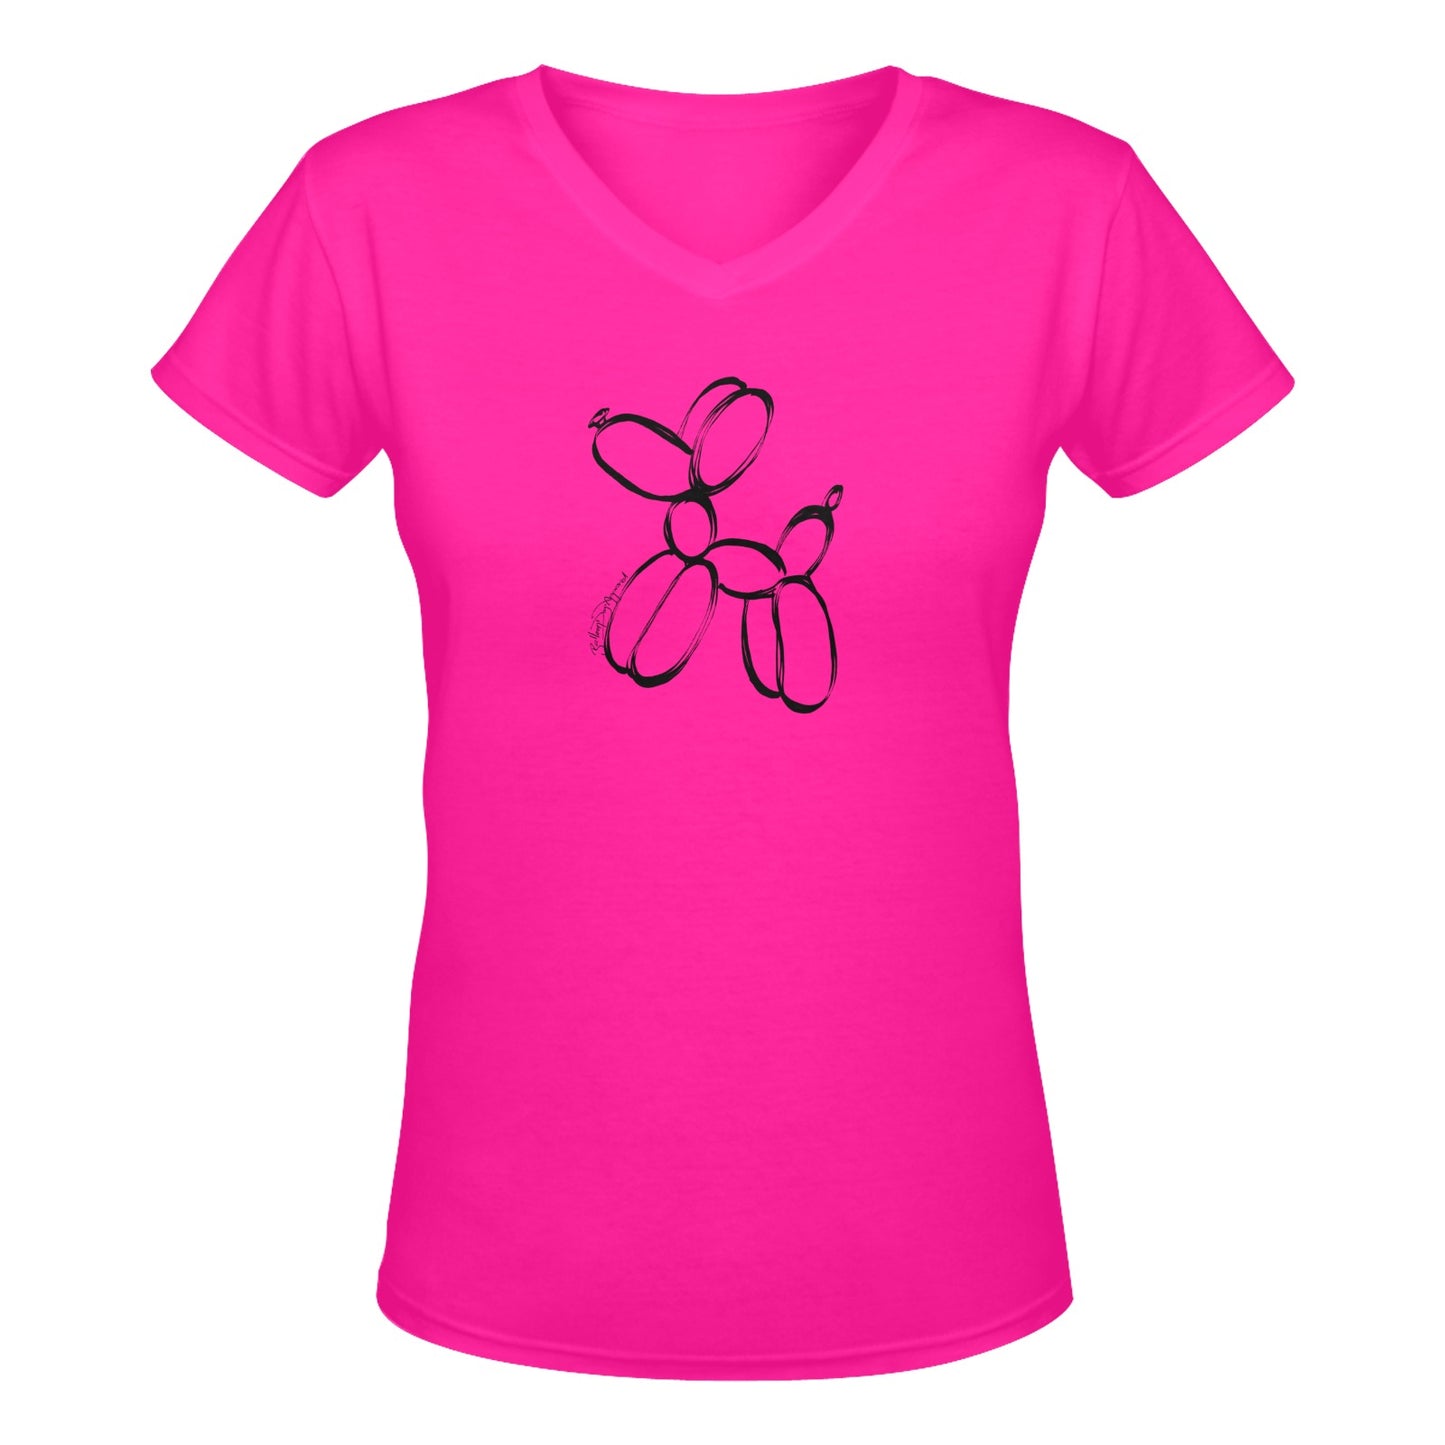 Pink Balloon Twister shirt with unique sketched balloon dog design